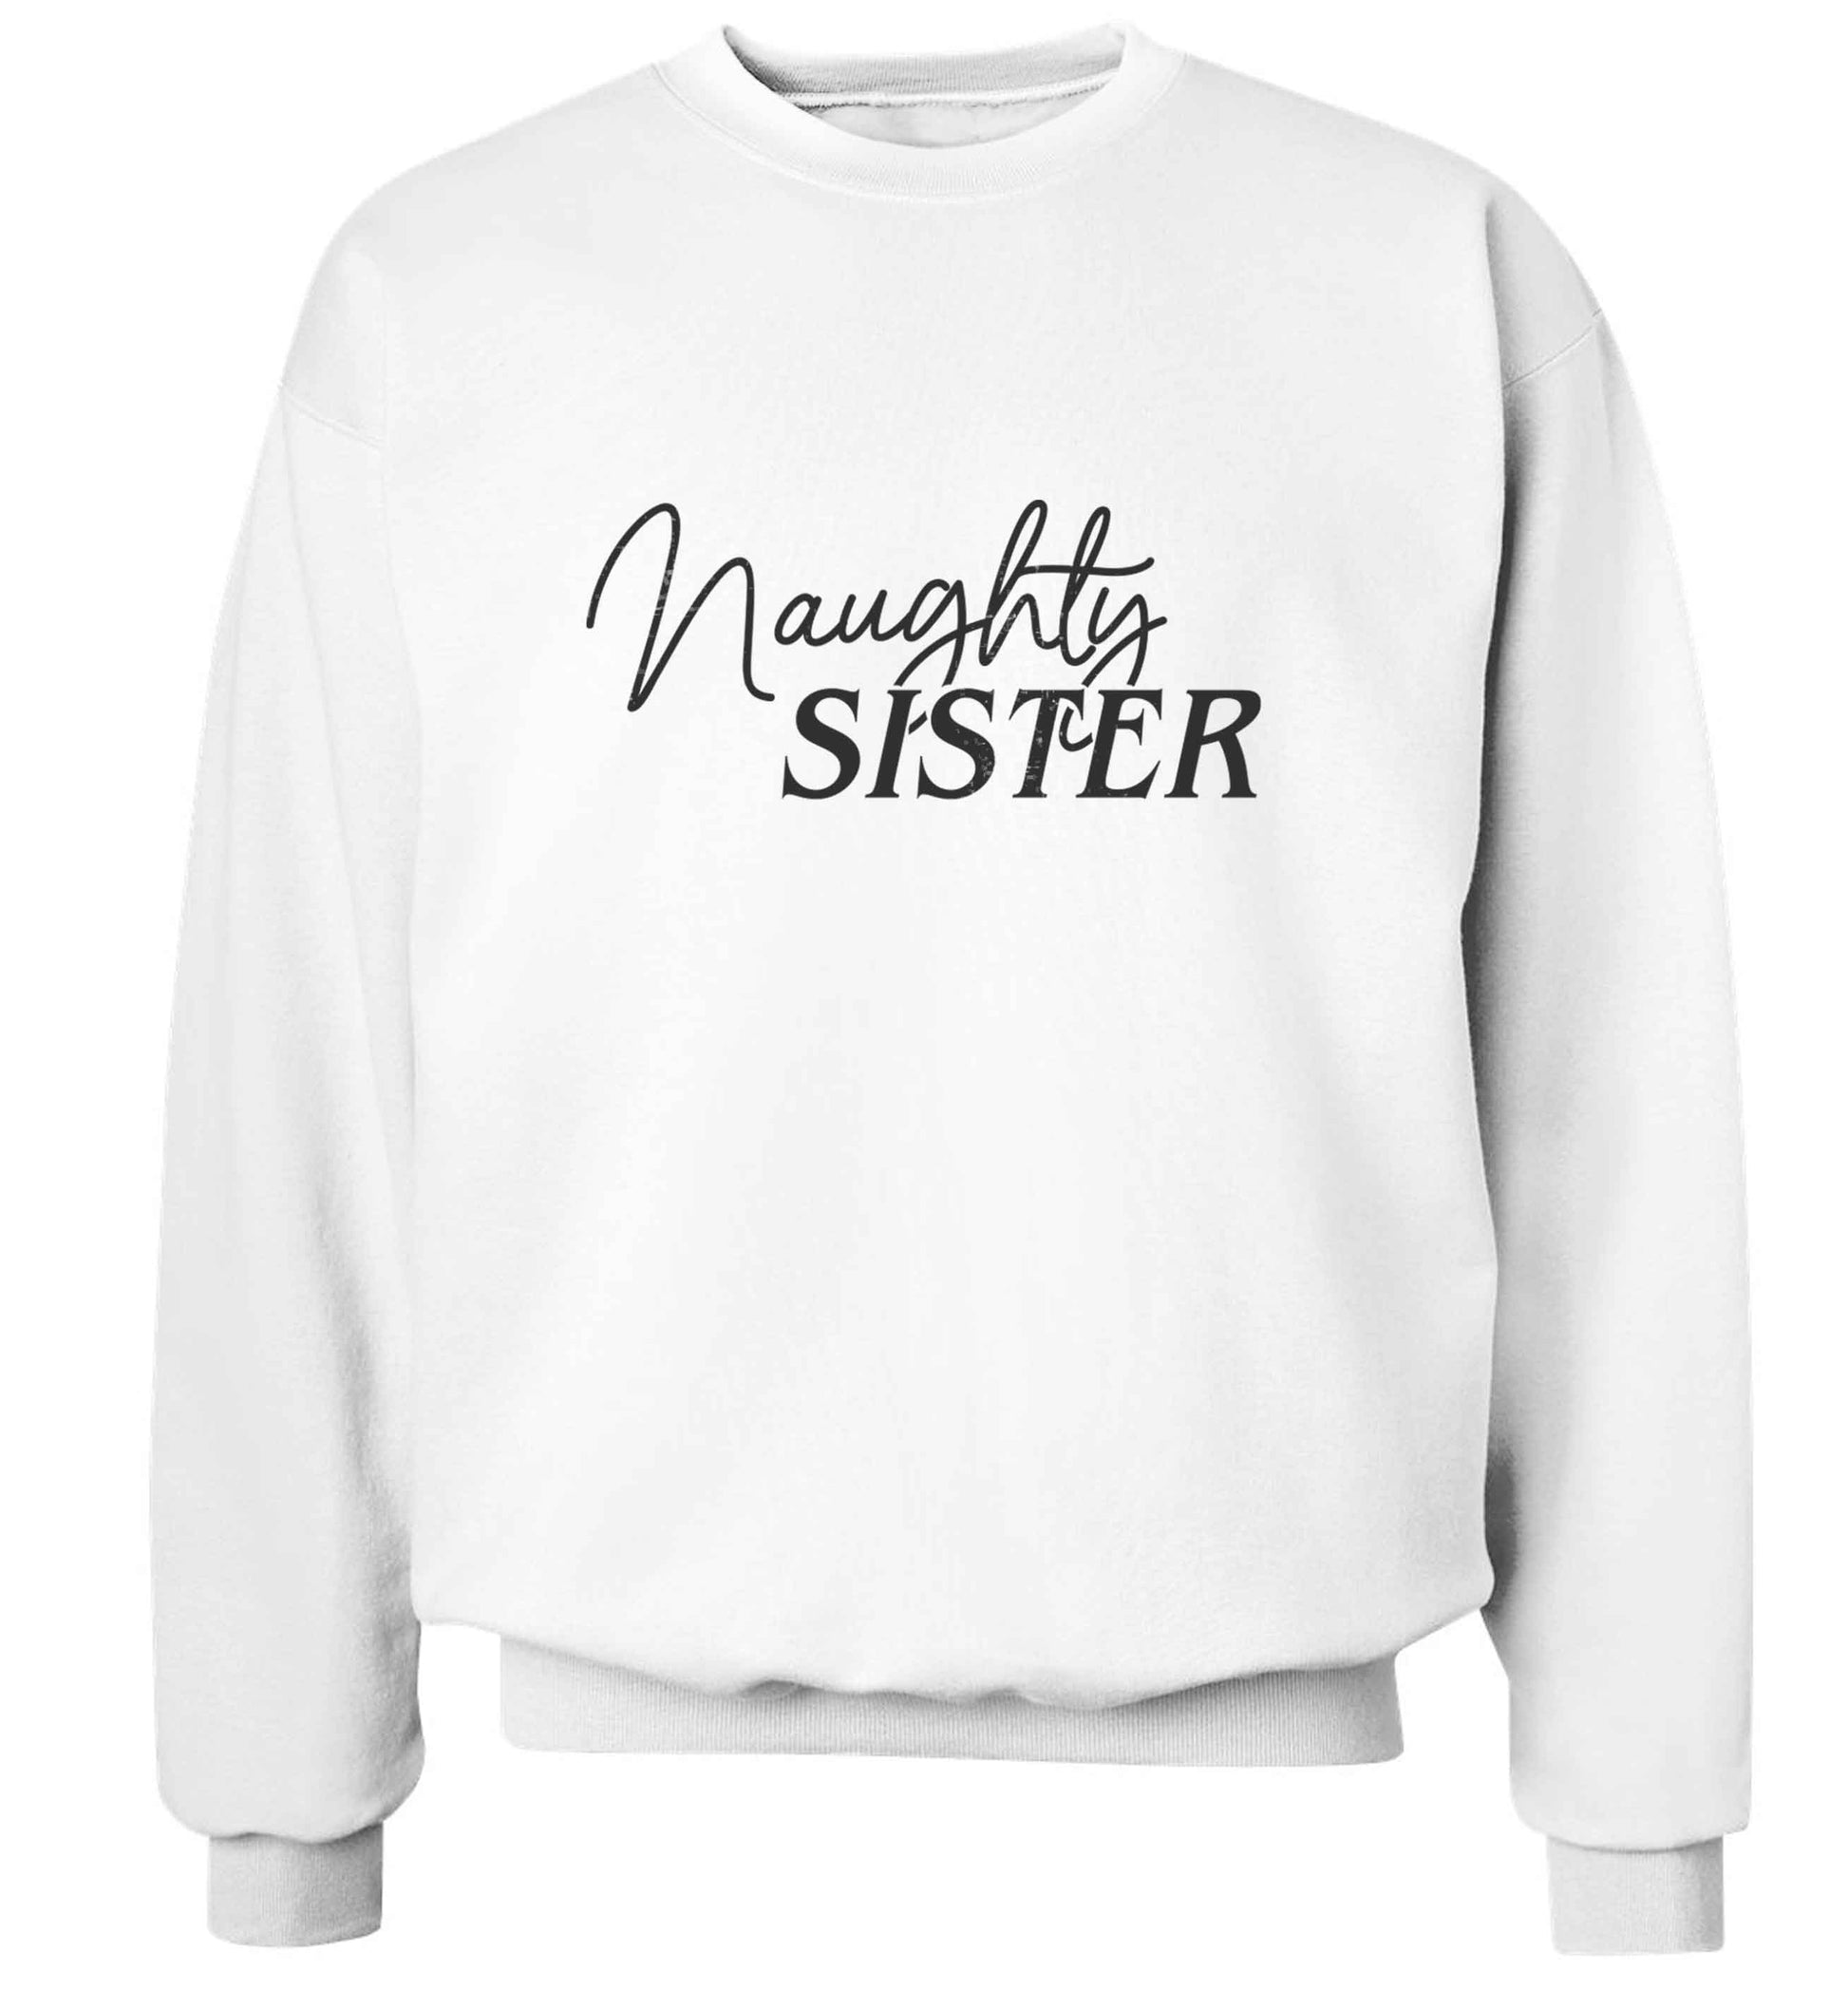 Naughty Sister adult's unisex white sweater 2XL